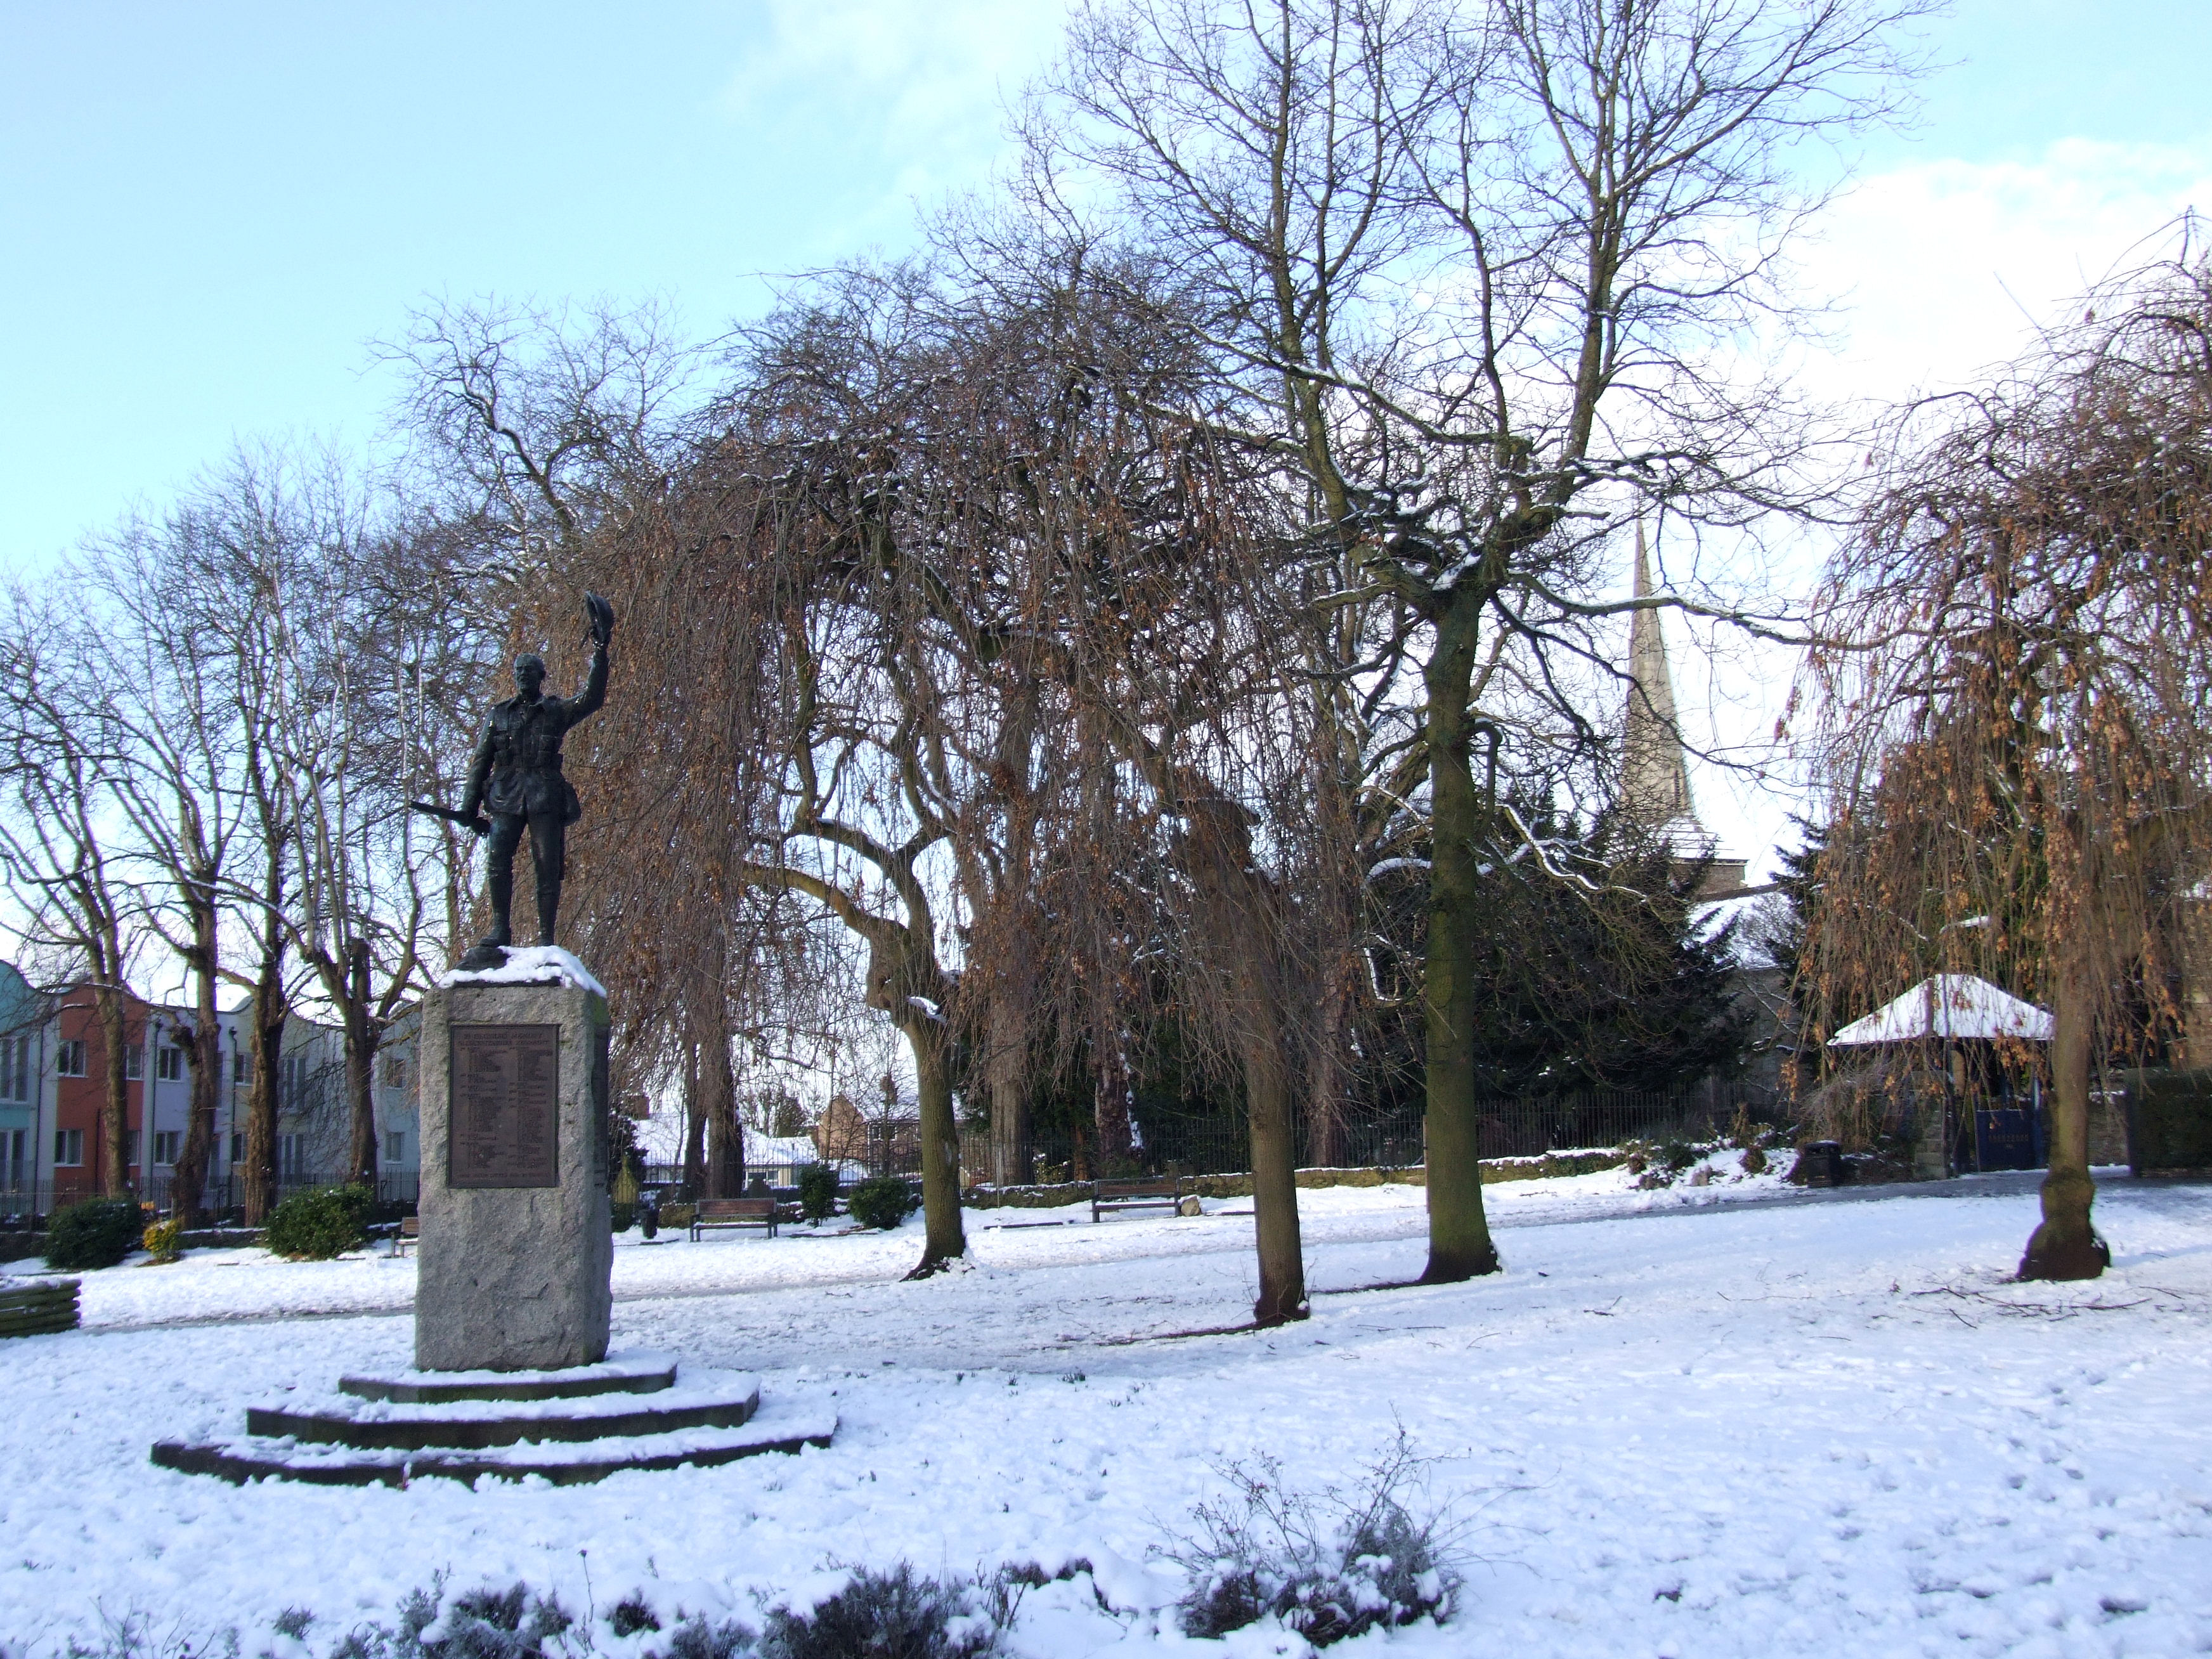 Image of Fishponds War Memorial in the grounds of the Church of St Mary, Bristol